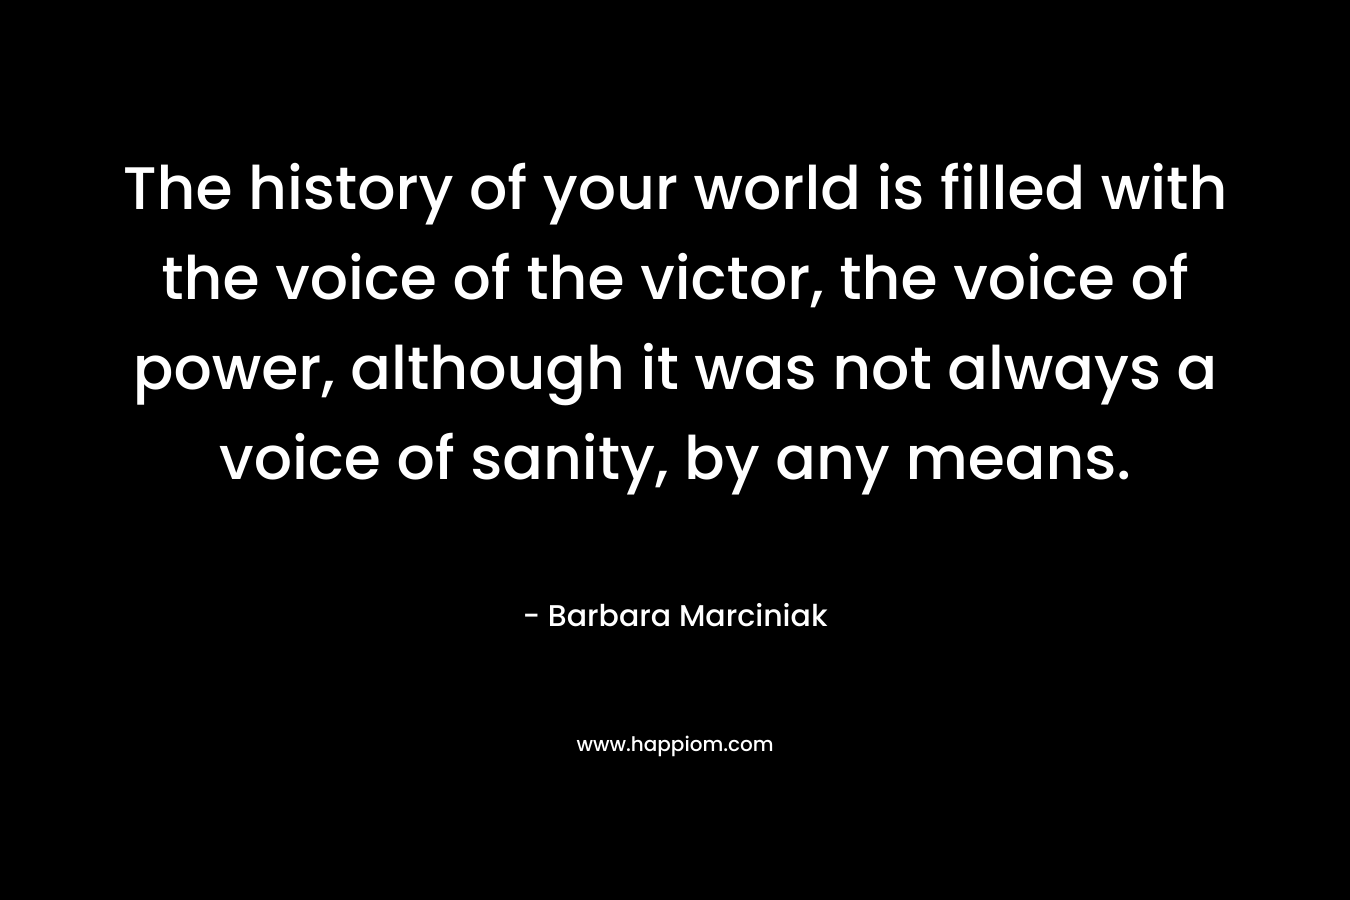 The history of your world is filled with the voice of the victor, the voice of power, although it was not always a voice of sanity, by any means.